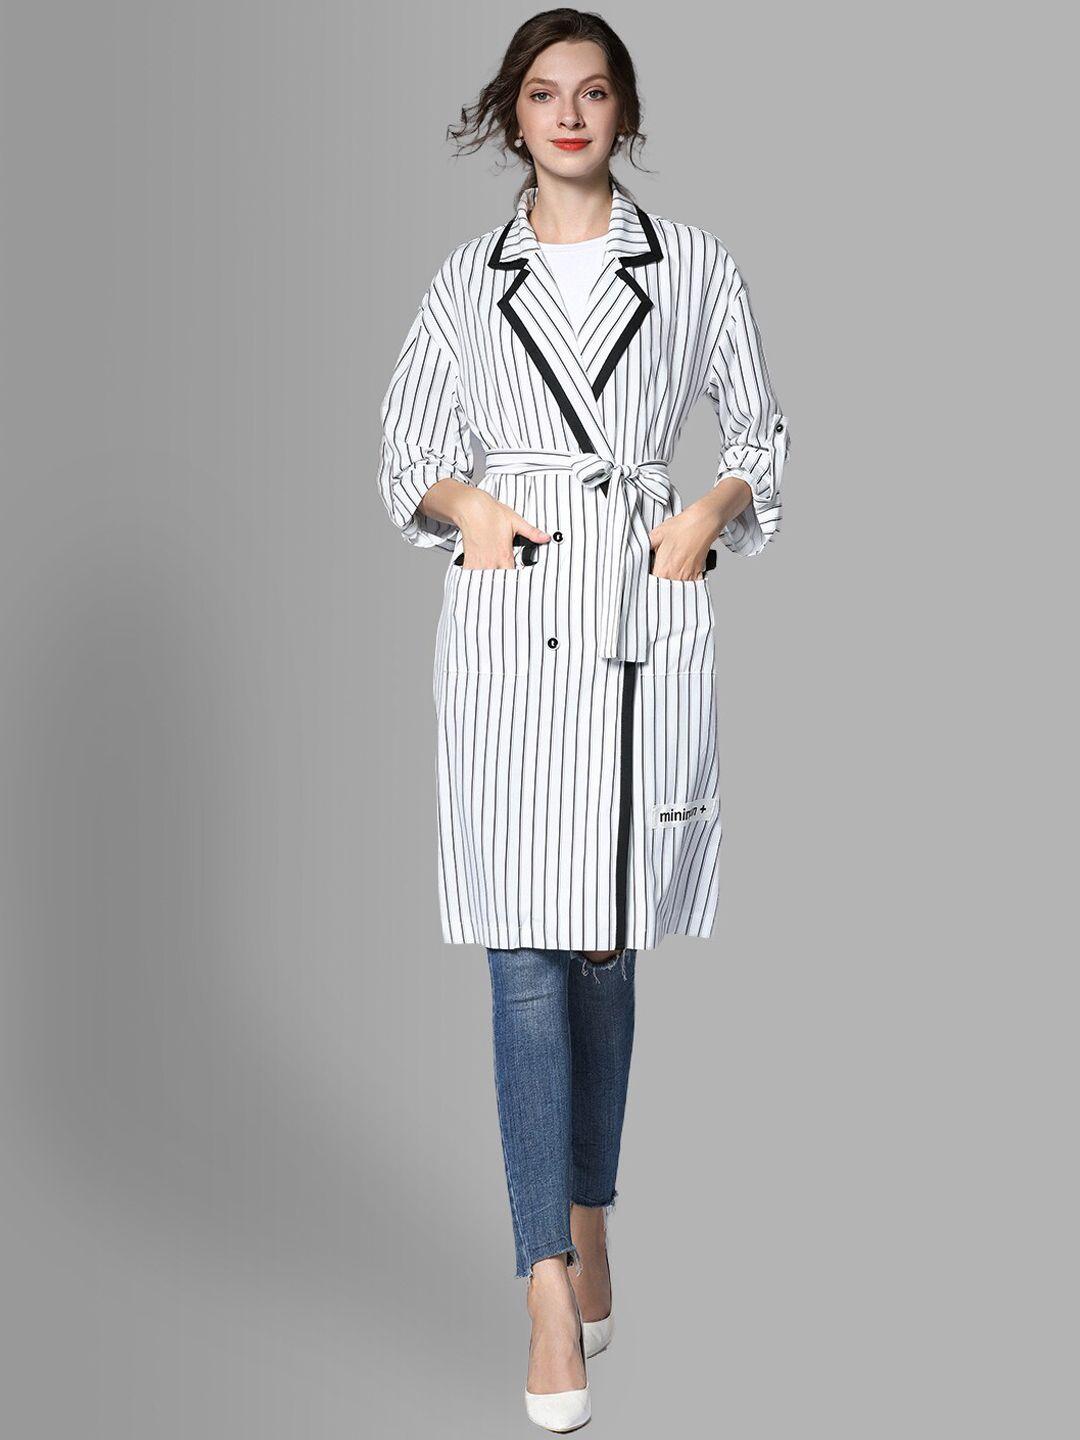 jc collection women white & black striped double-breasted trench coat